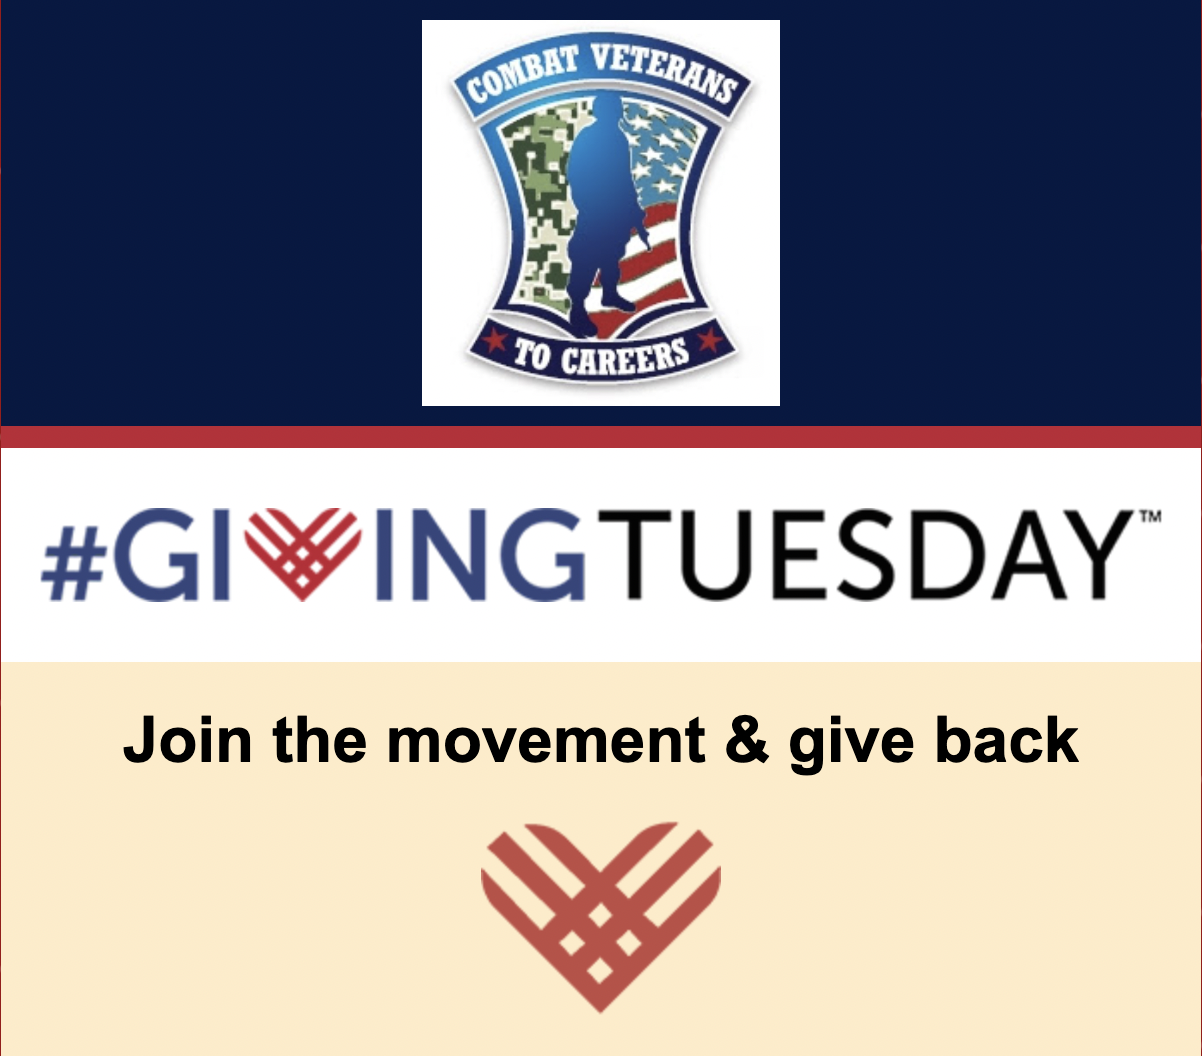 Today is #GIVINGTUESDAY! Here is the latest news on ways to give back!